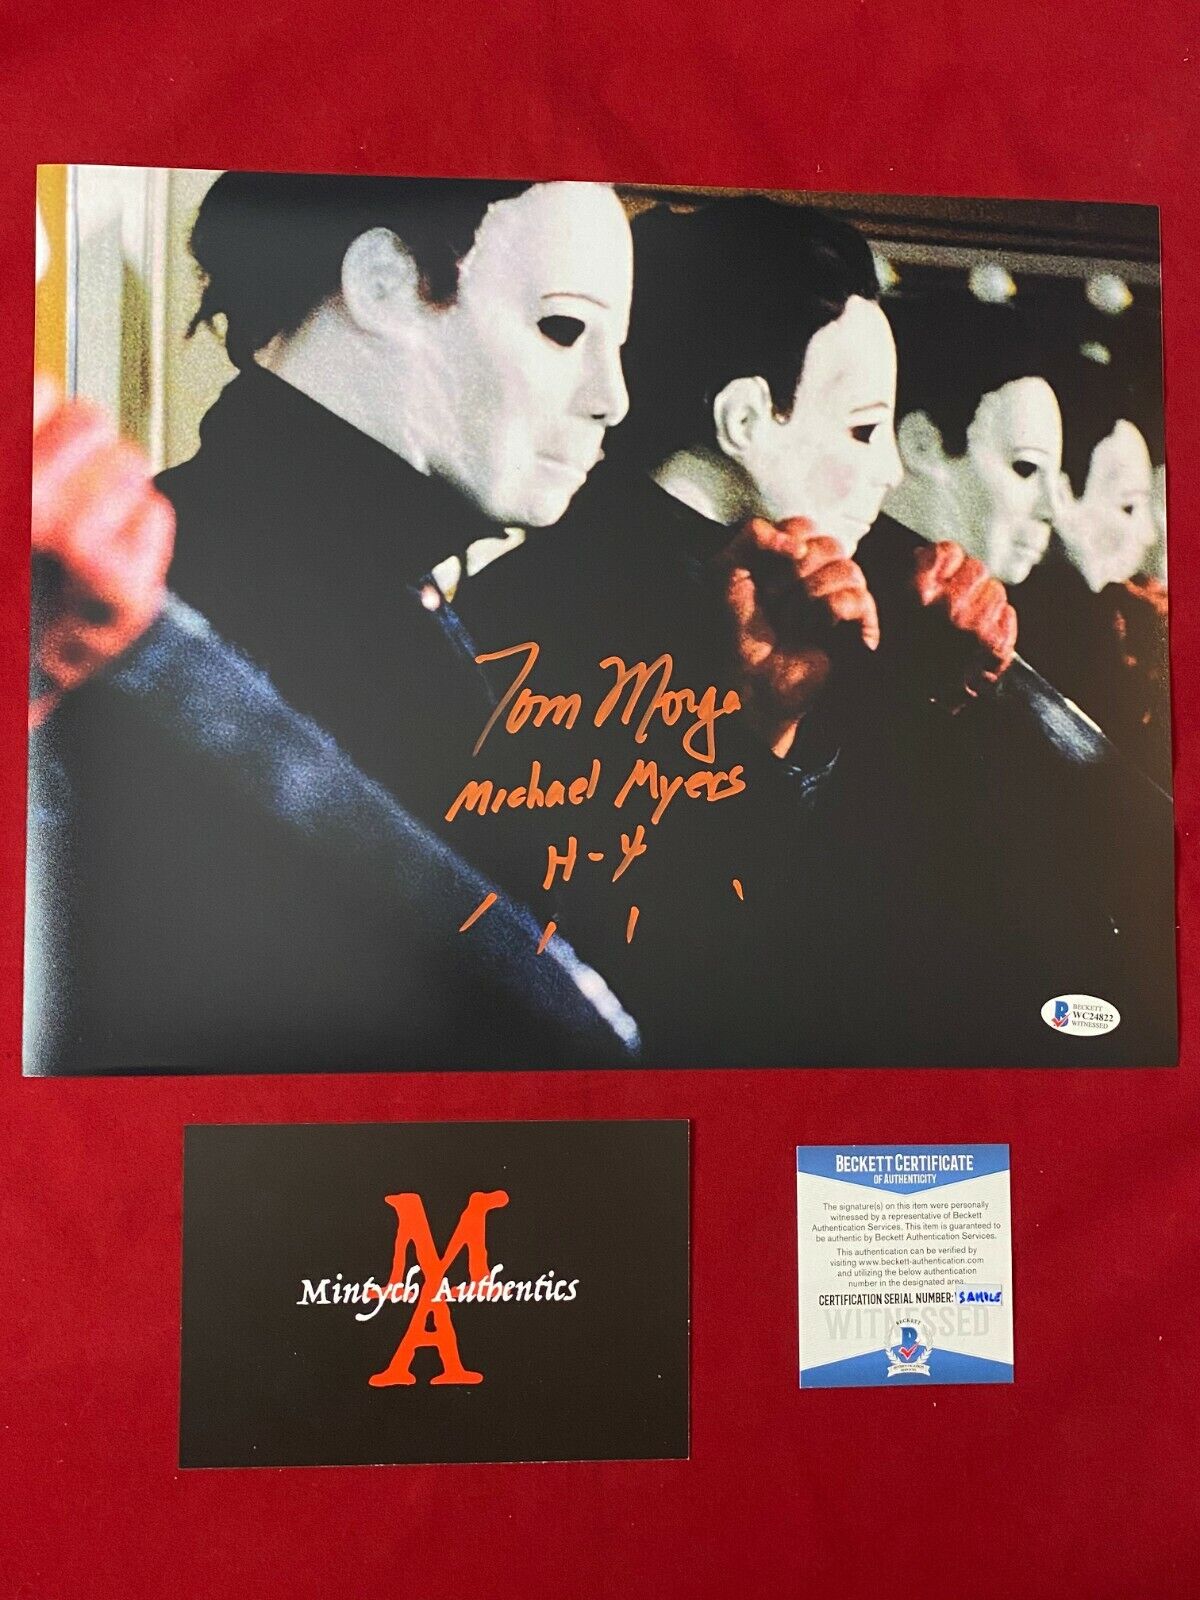 TOM MORGA AUTOGRAPHED SIGNED 11x14 Photo Poster painting! HALLOWEEN 4! MICHAEL MYERS! BECKETT!